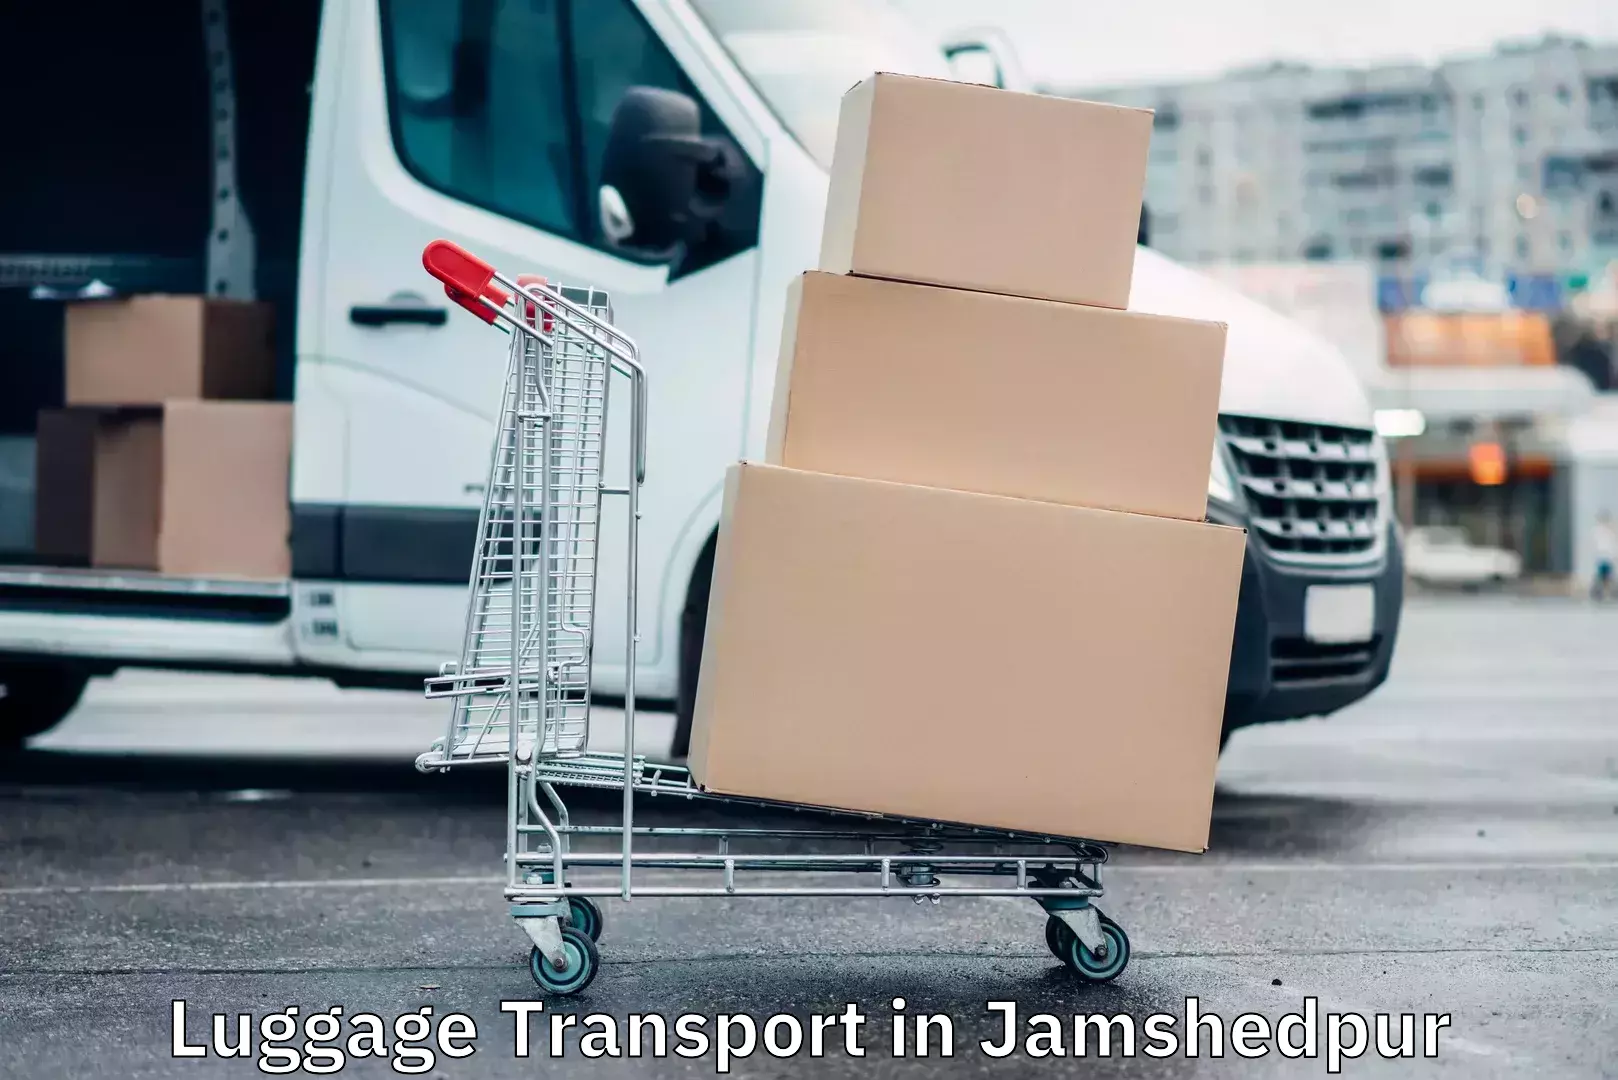 Luggage delivery app in Jamshedpur